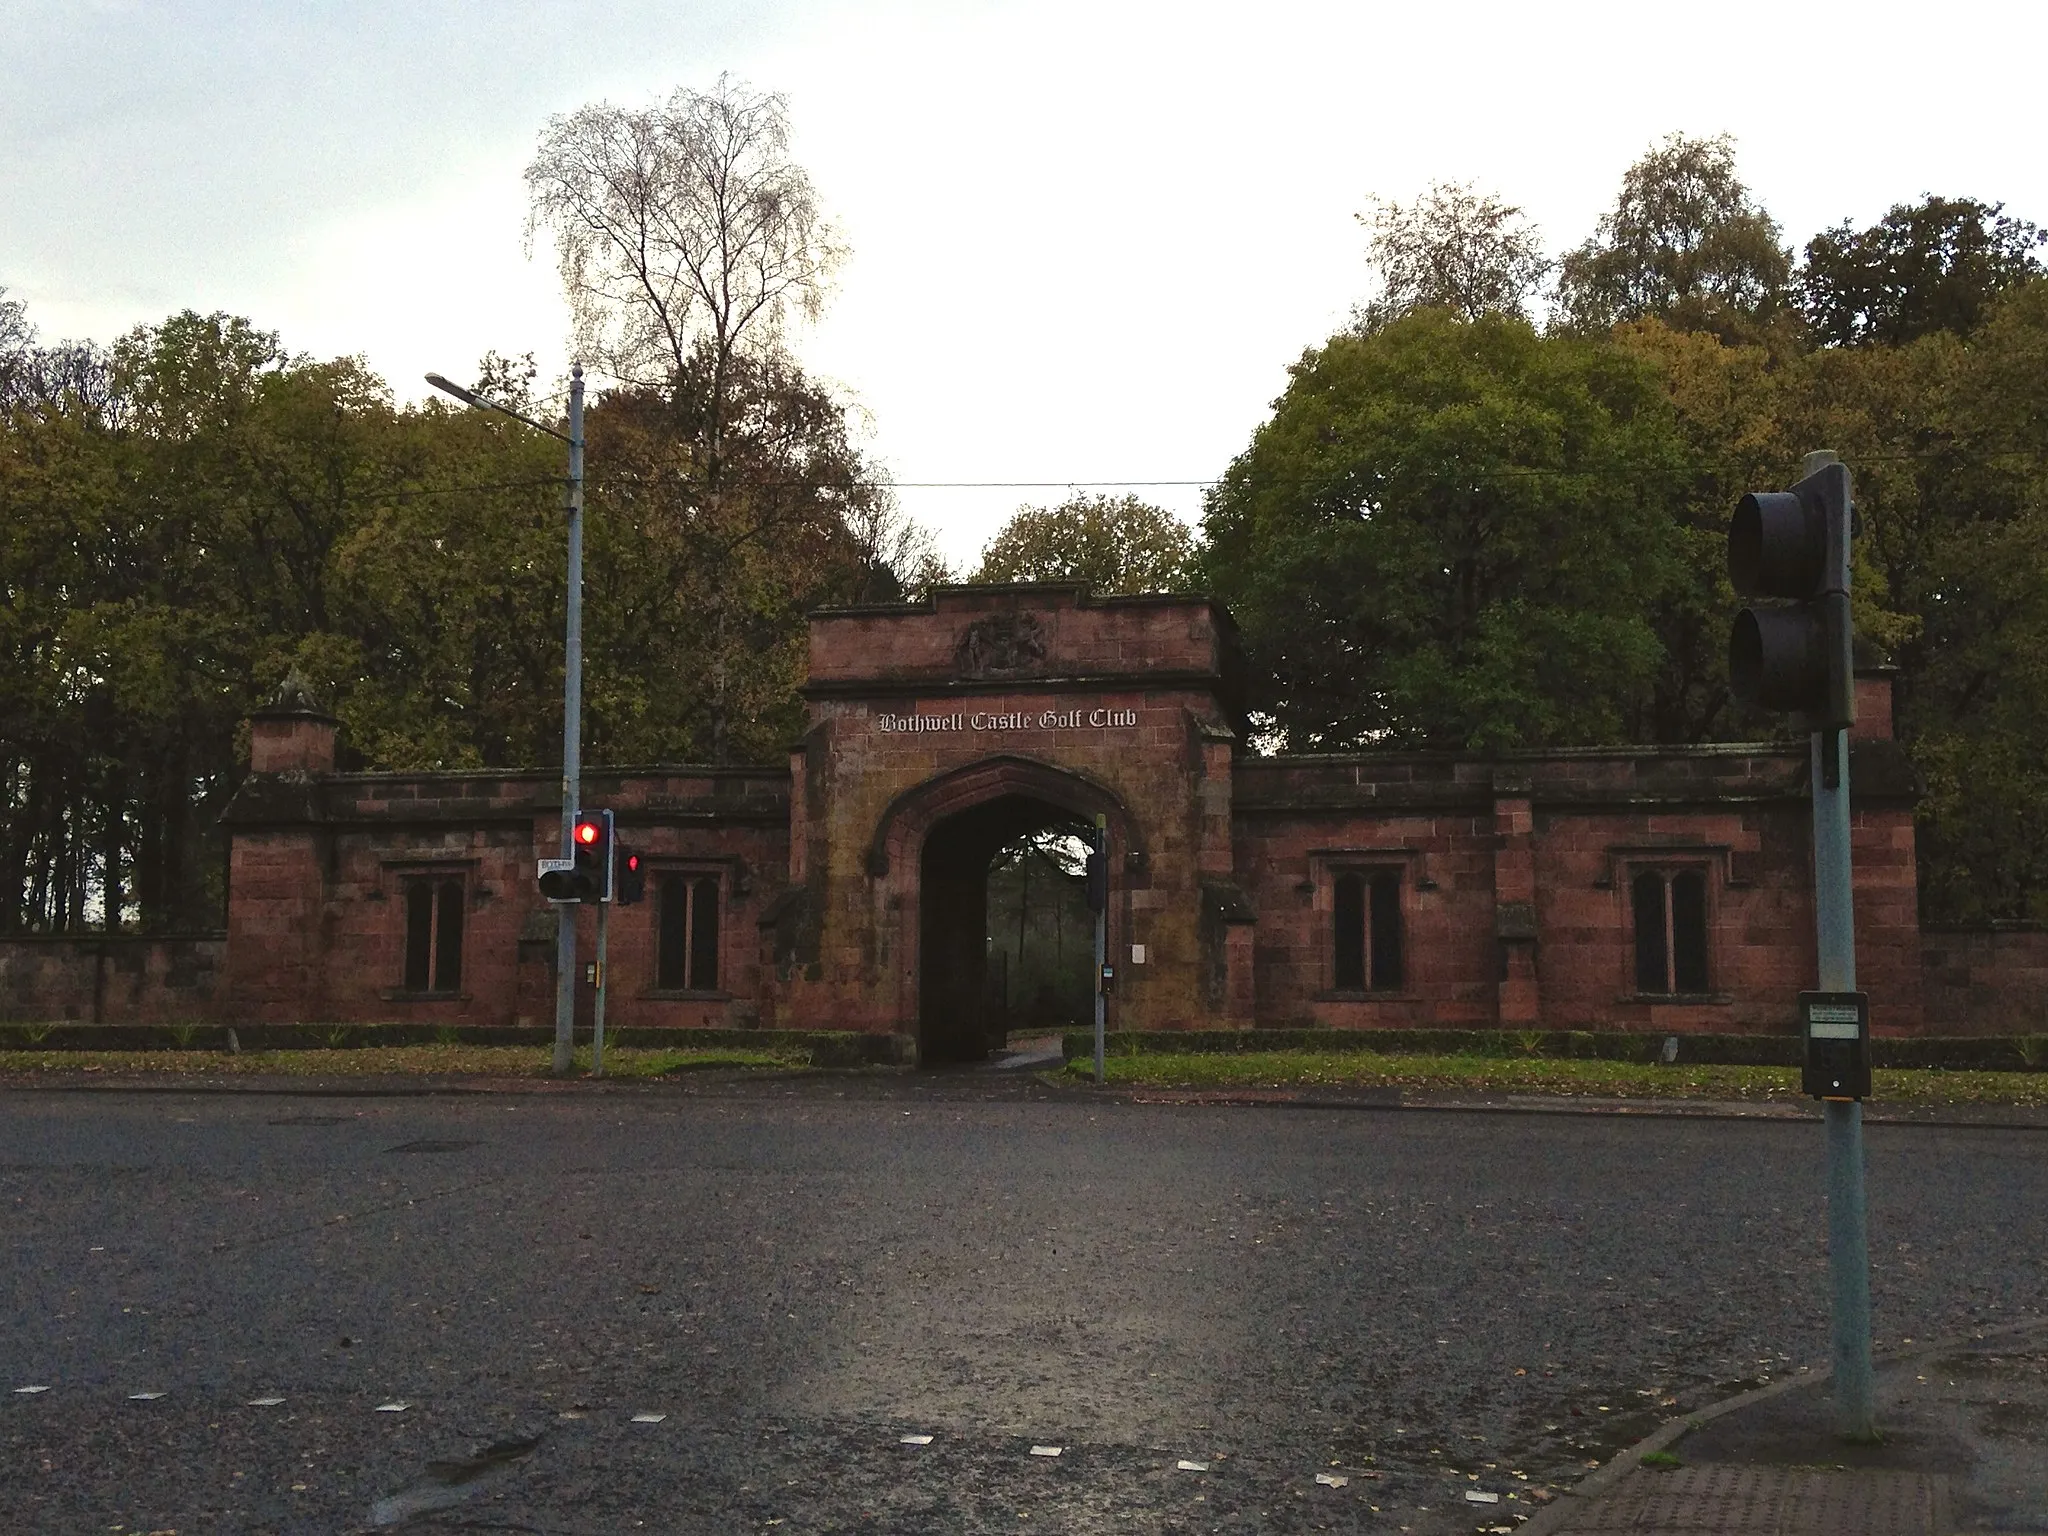 Photo showing: The entrance to Bothwell Castle Golf Club, located on Bothwell Road.